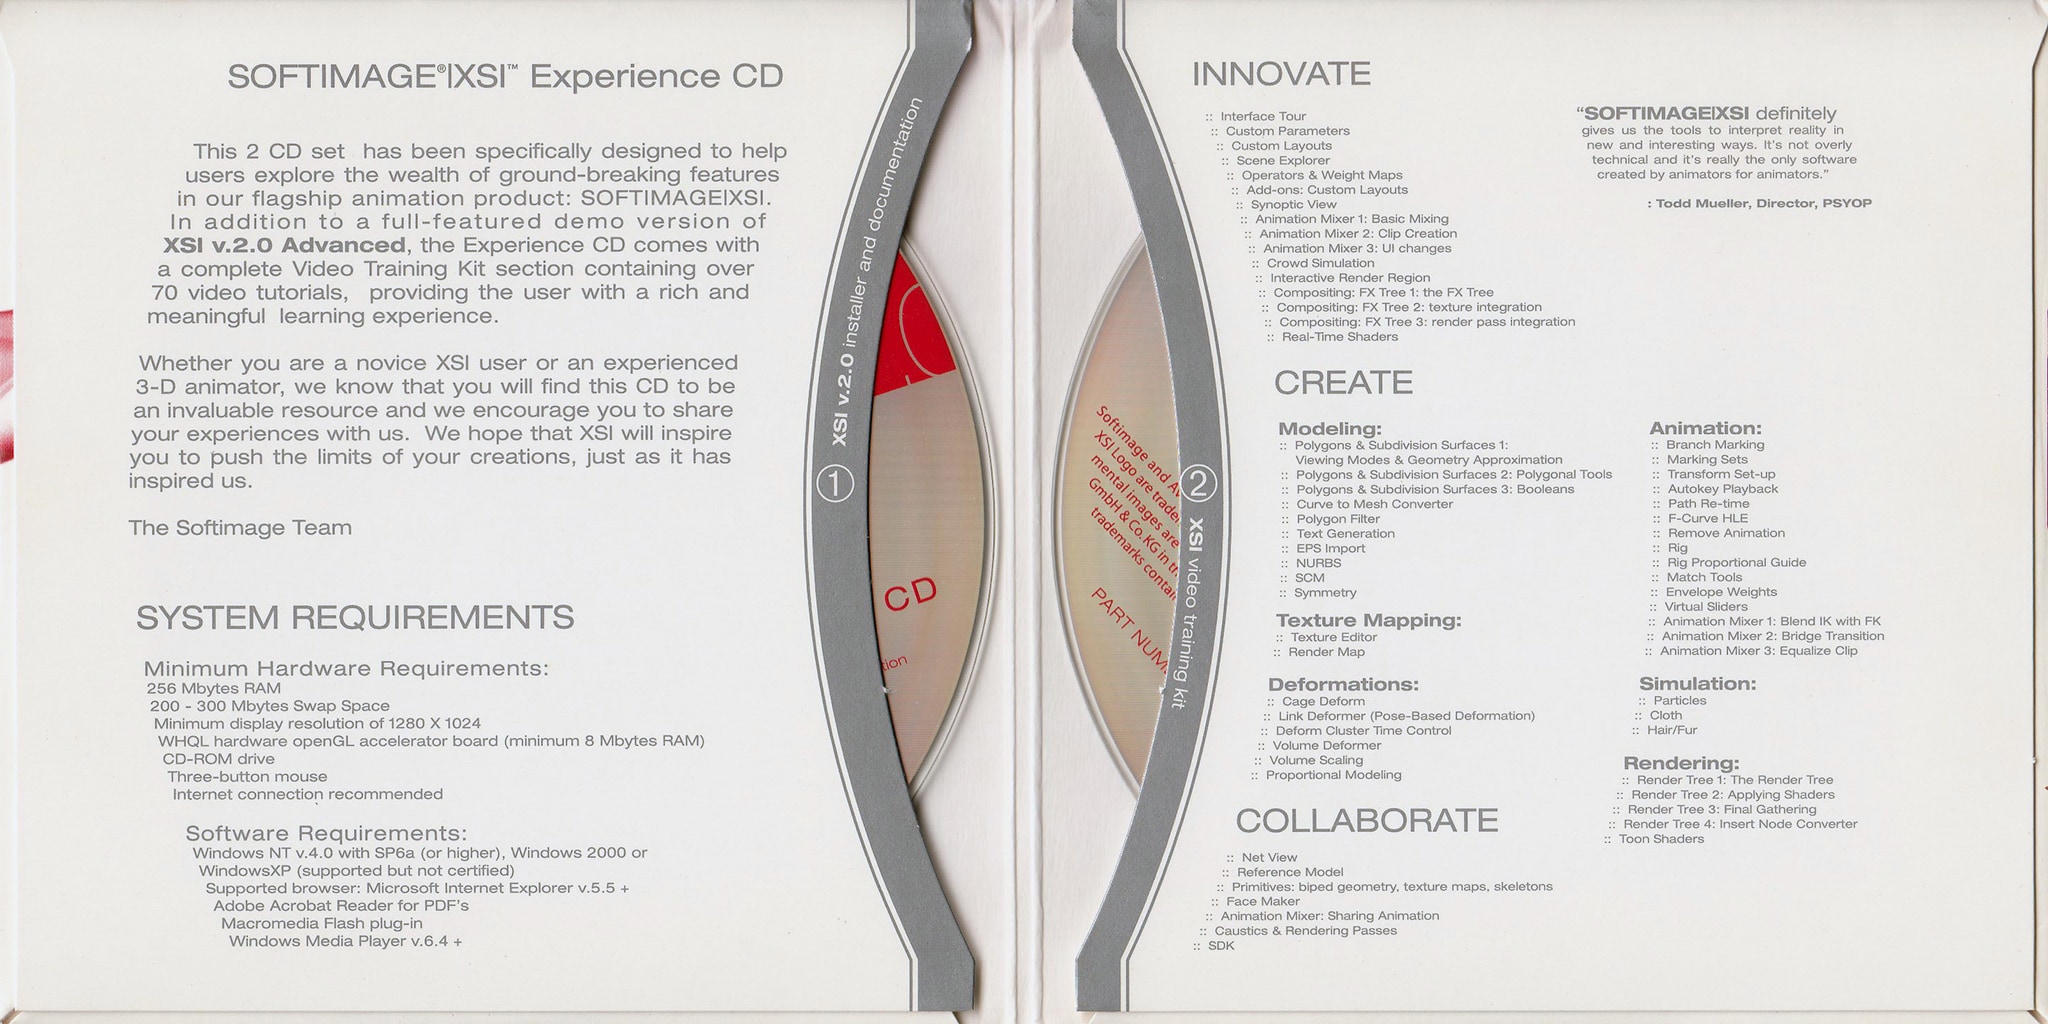 Inside the Softimage XSI installation CD packaging